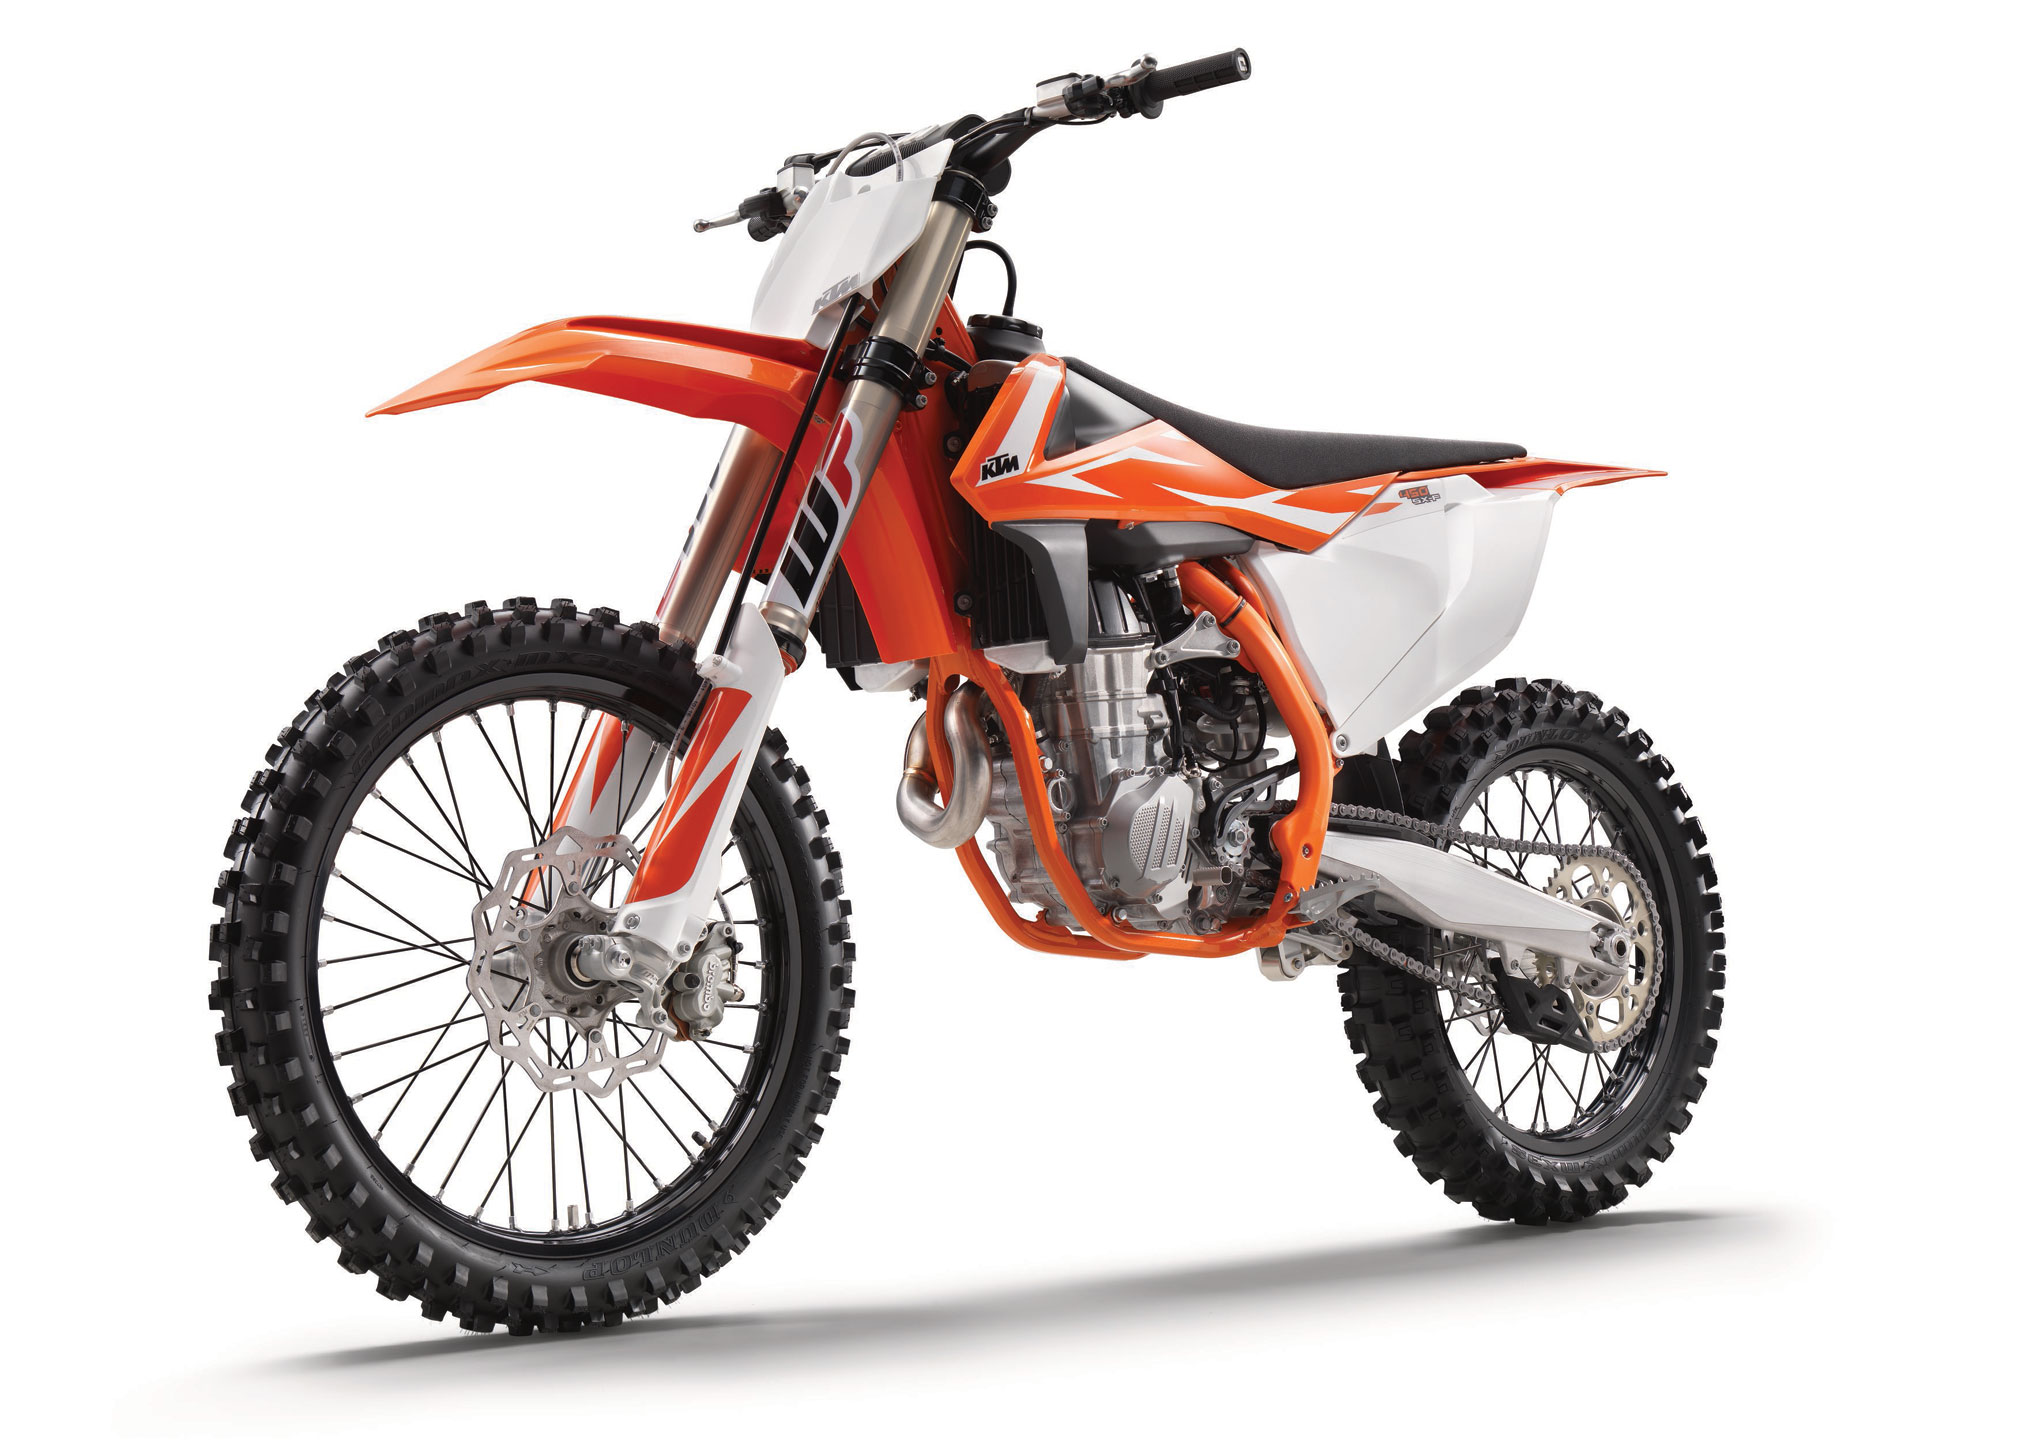 2018 KTM 450 SX-F Review • Total Motorcycle